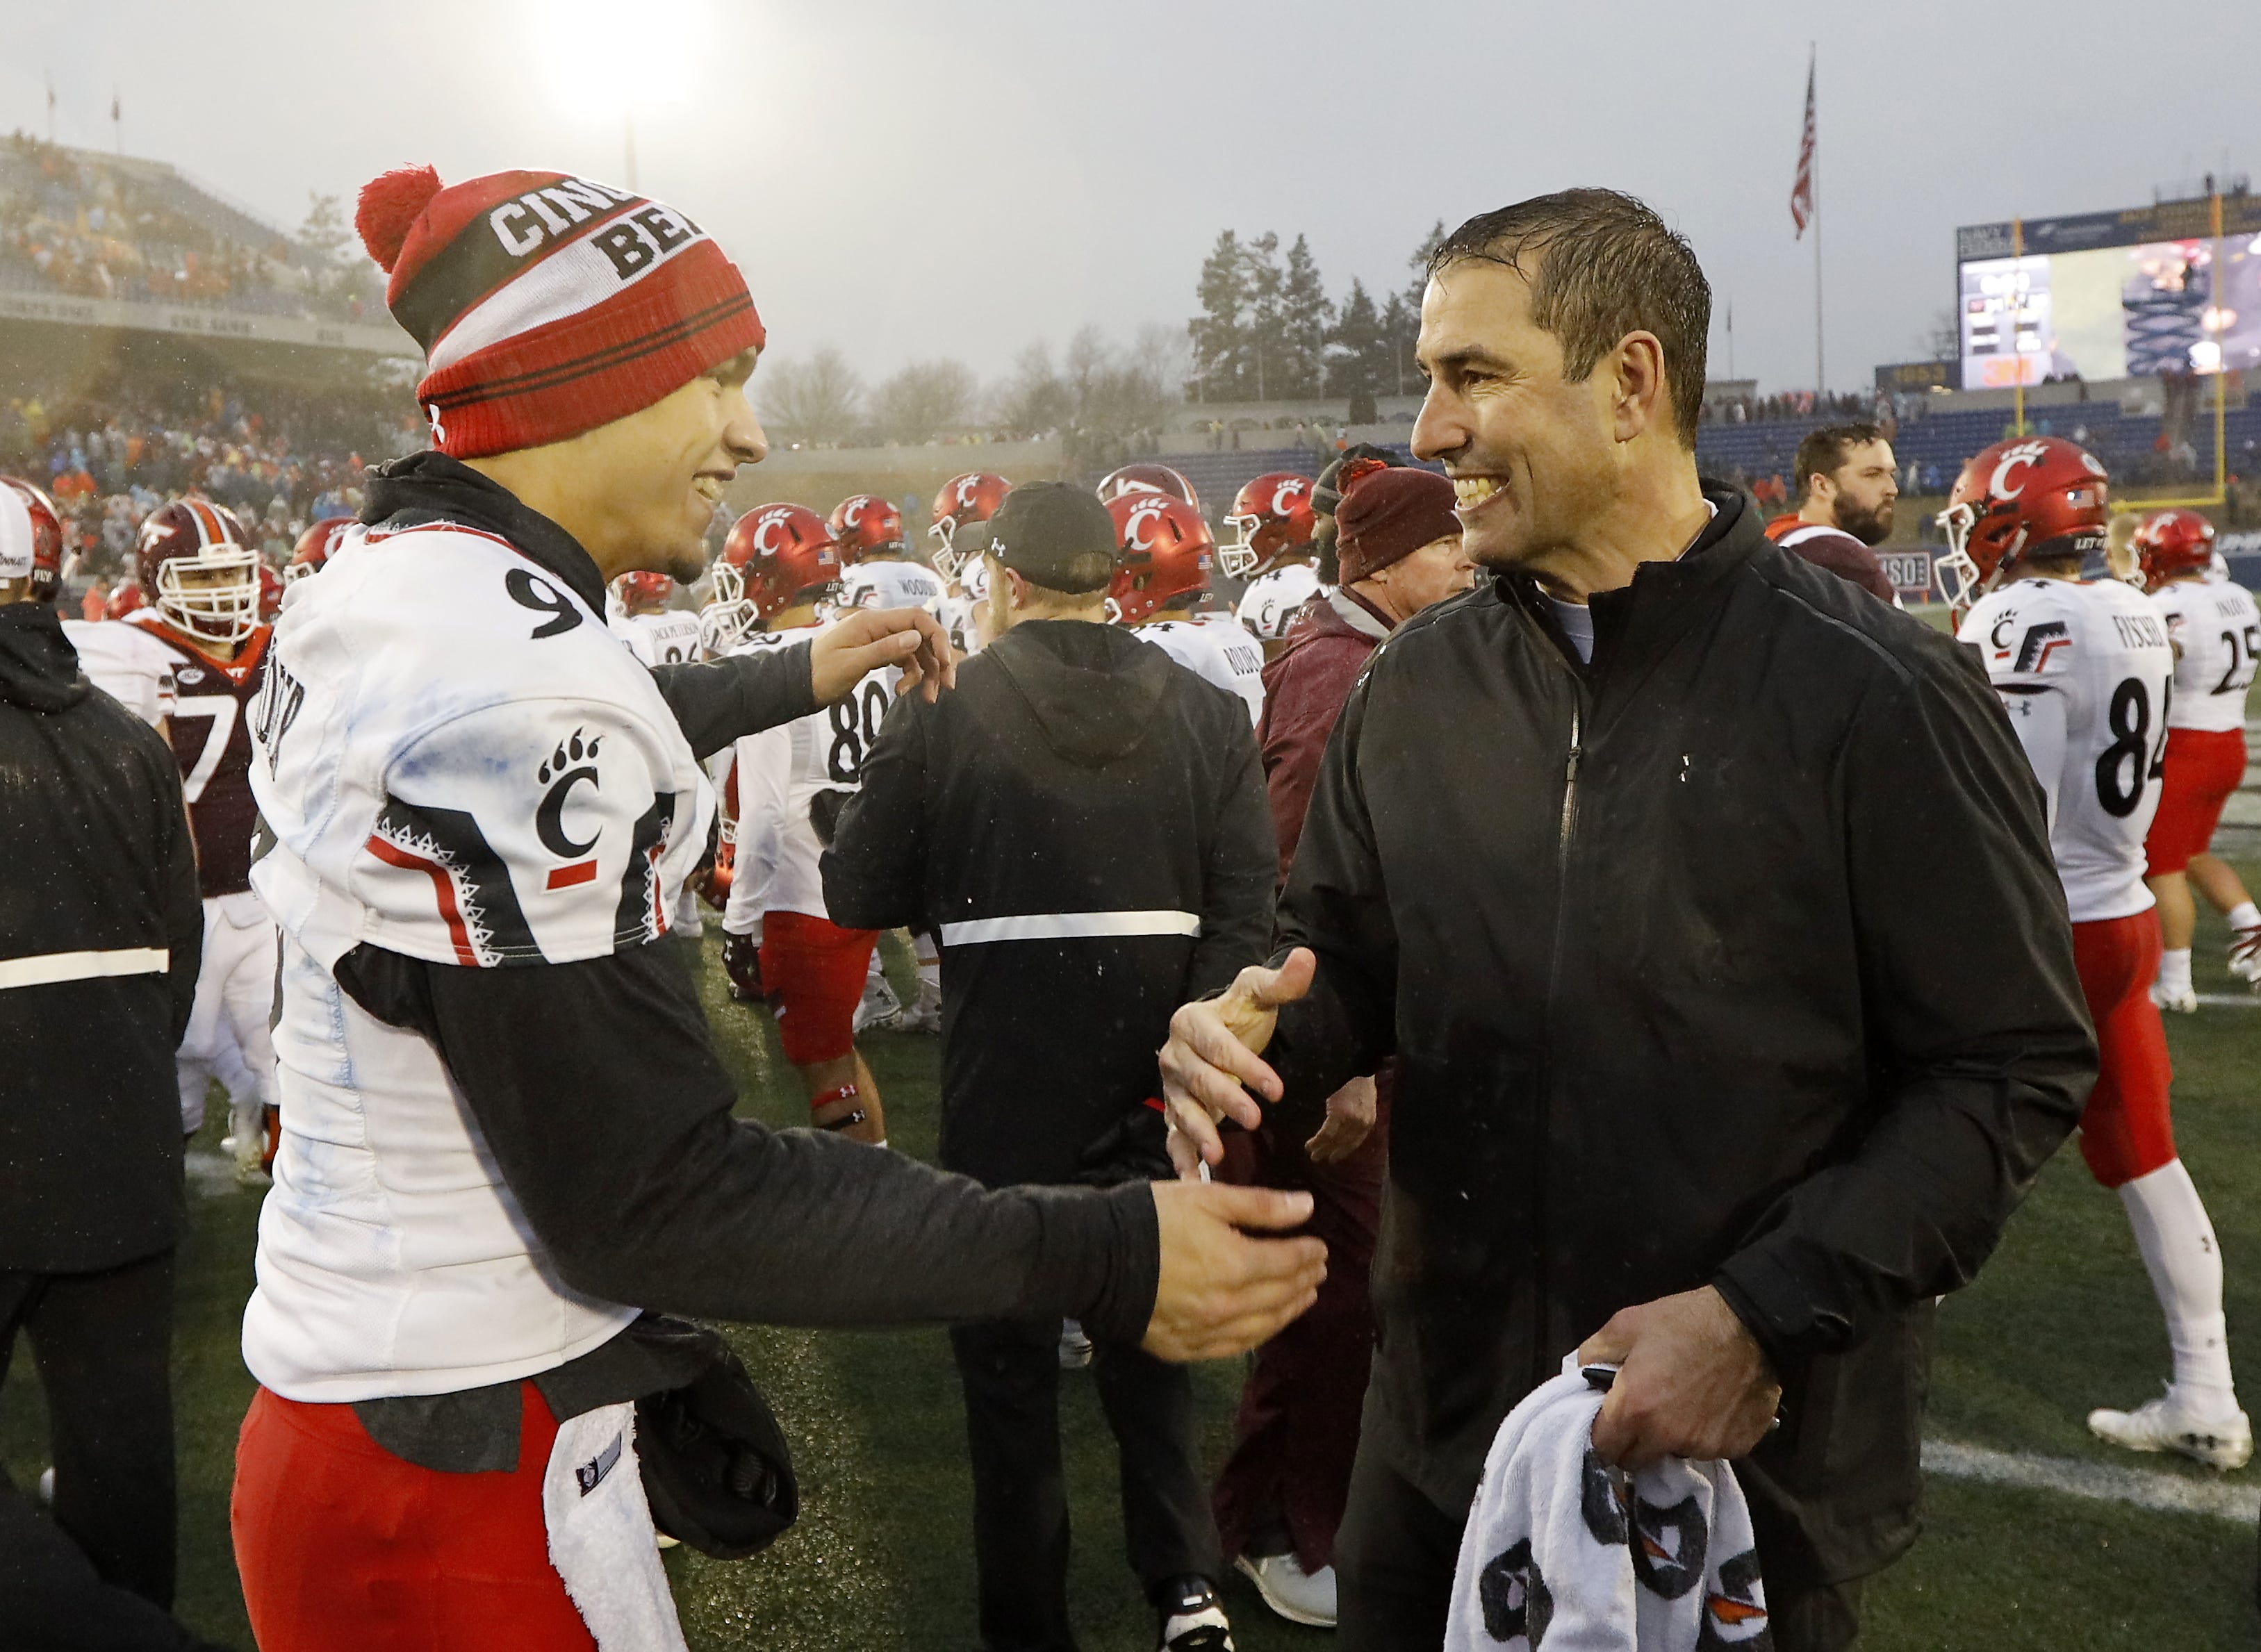 Cincinnati Bearcats coach Luke Fickell on Notre Dame vacancy: 'There is no speculation'